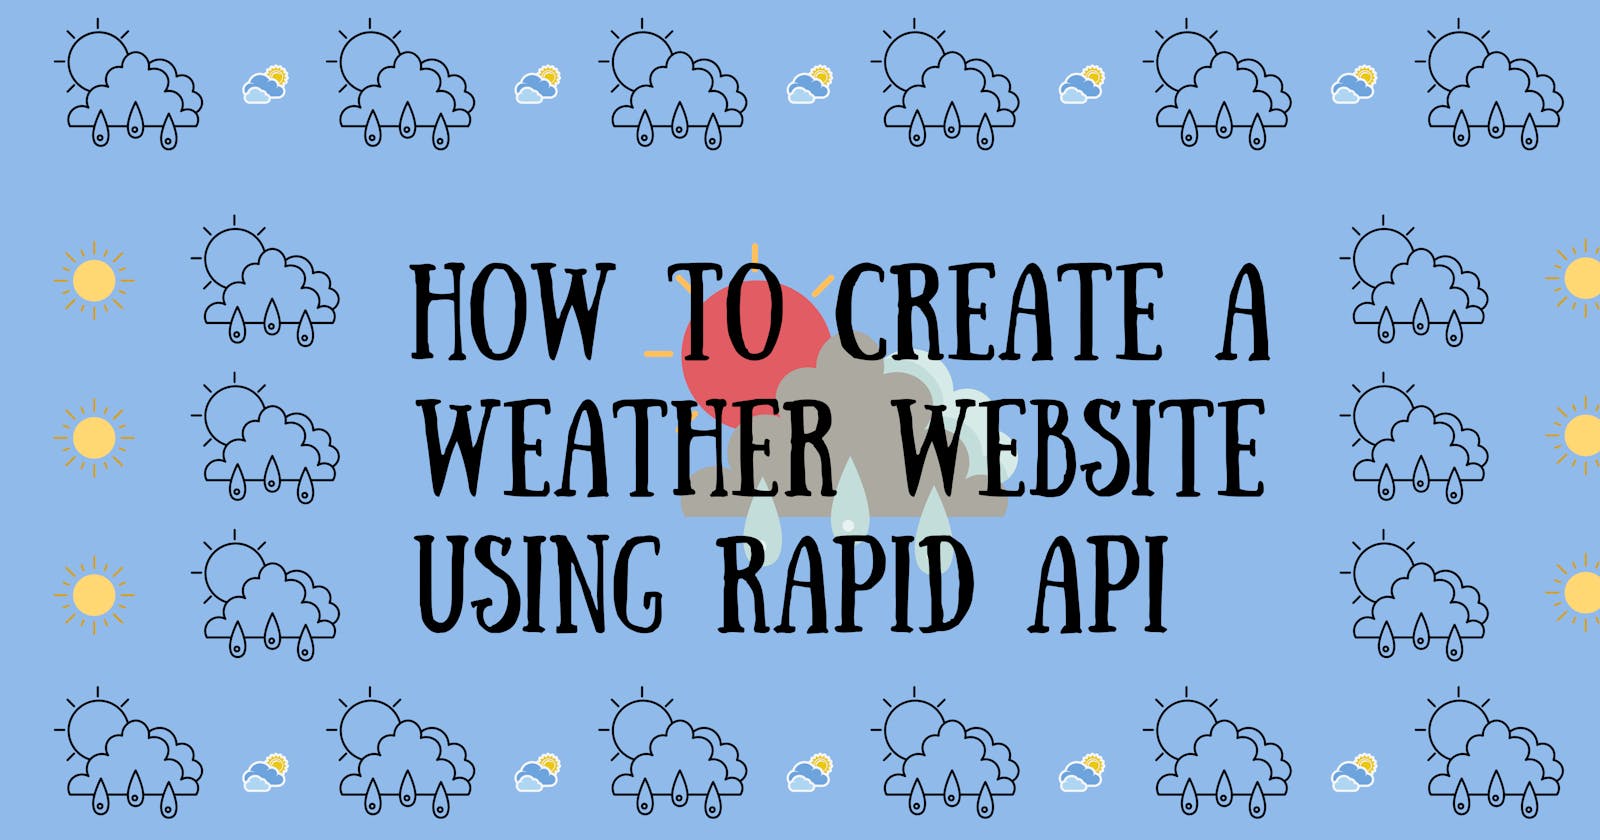 How to make a Weather Website :-